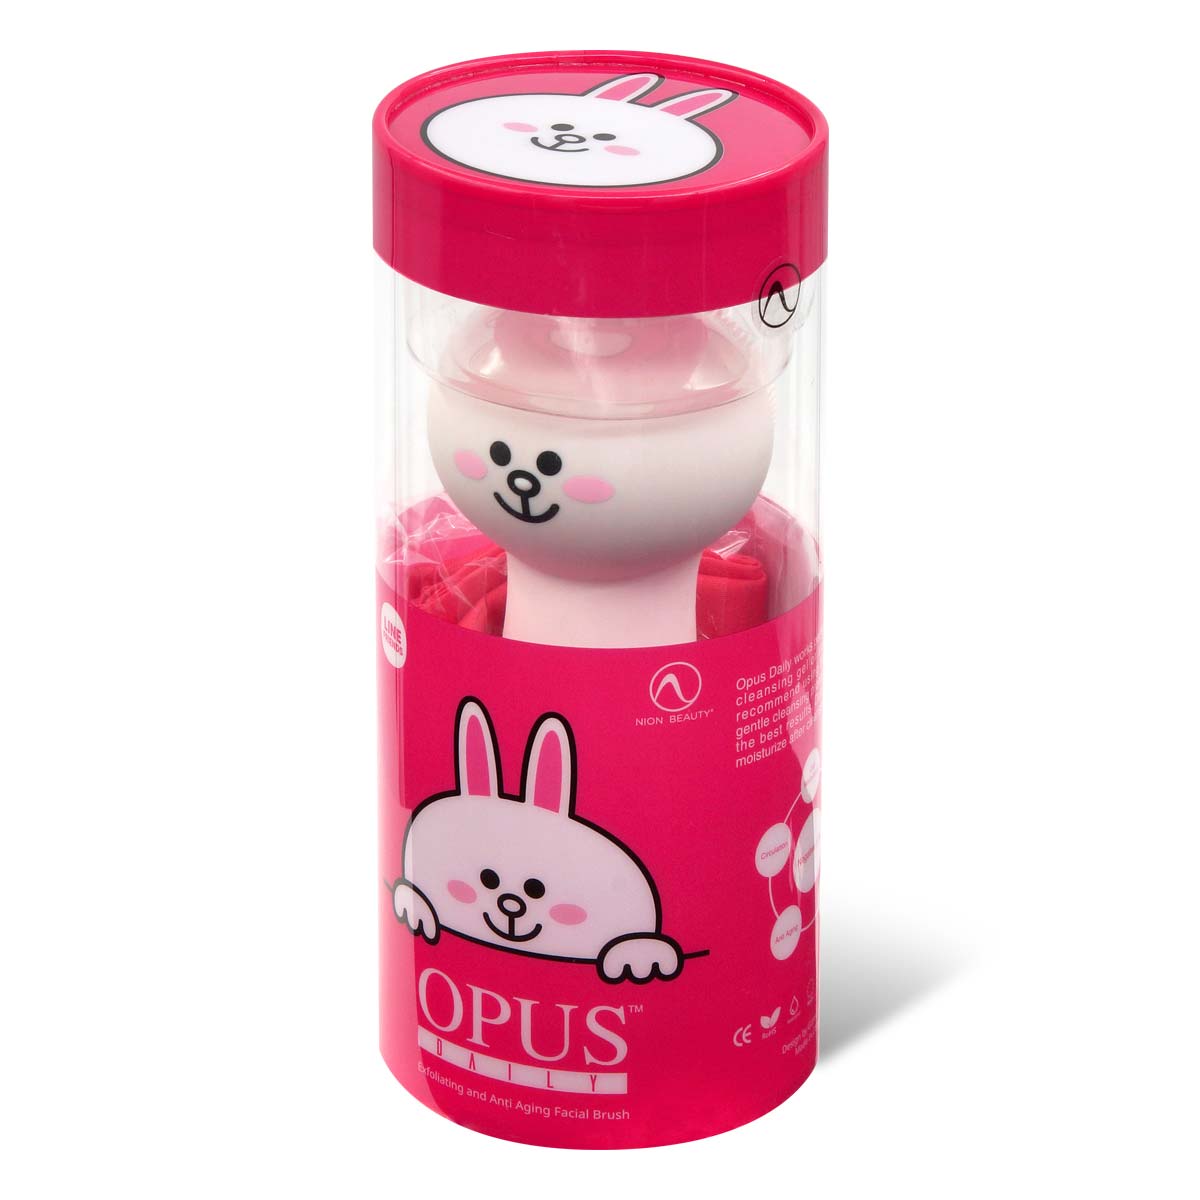 Line Friends Opus Daily Exfoliating and Anti Aging Facial Brush (Cony)-p_1